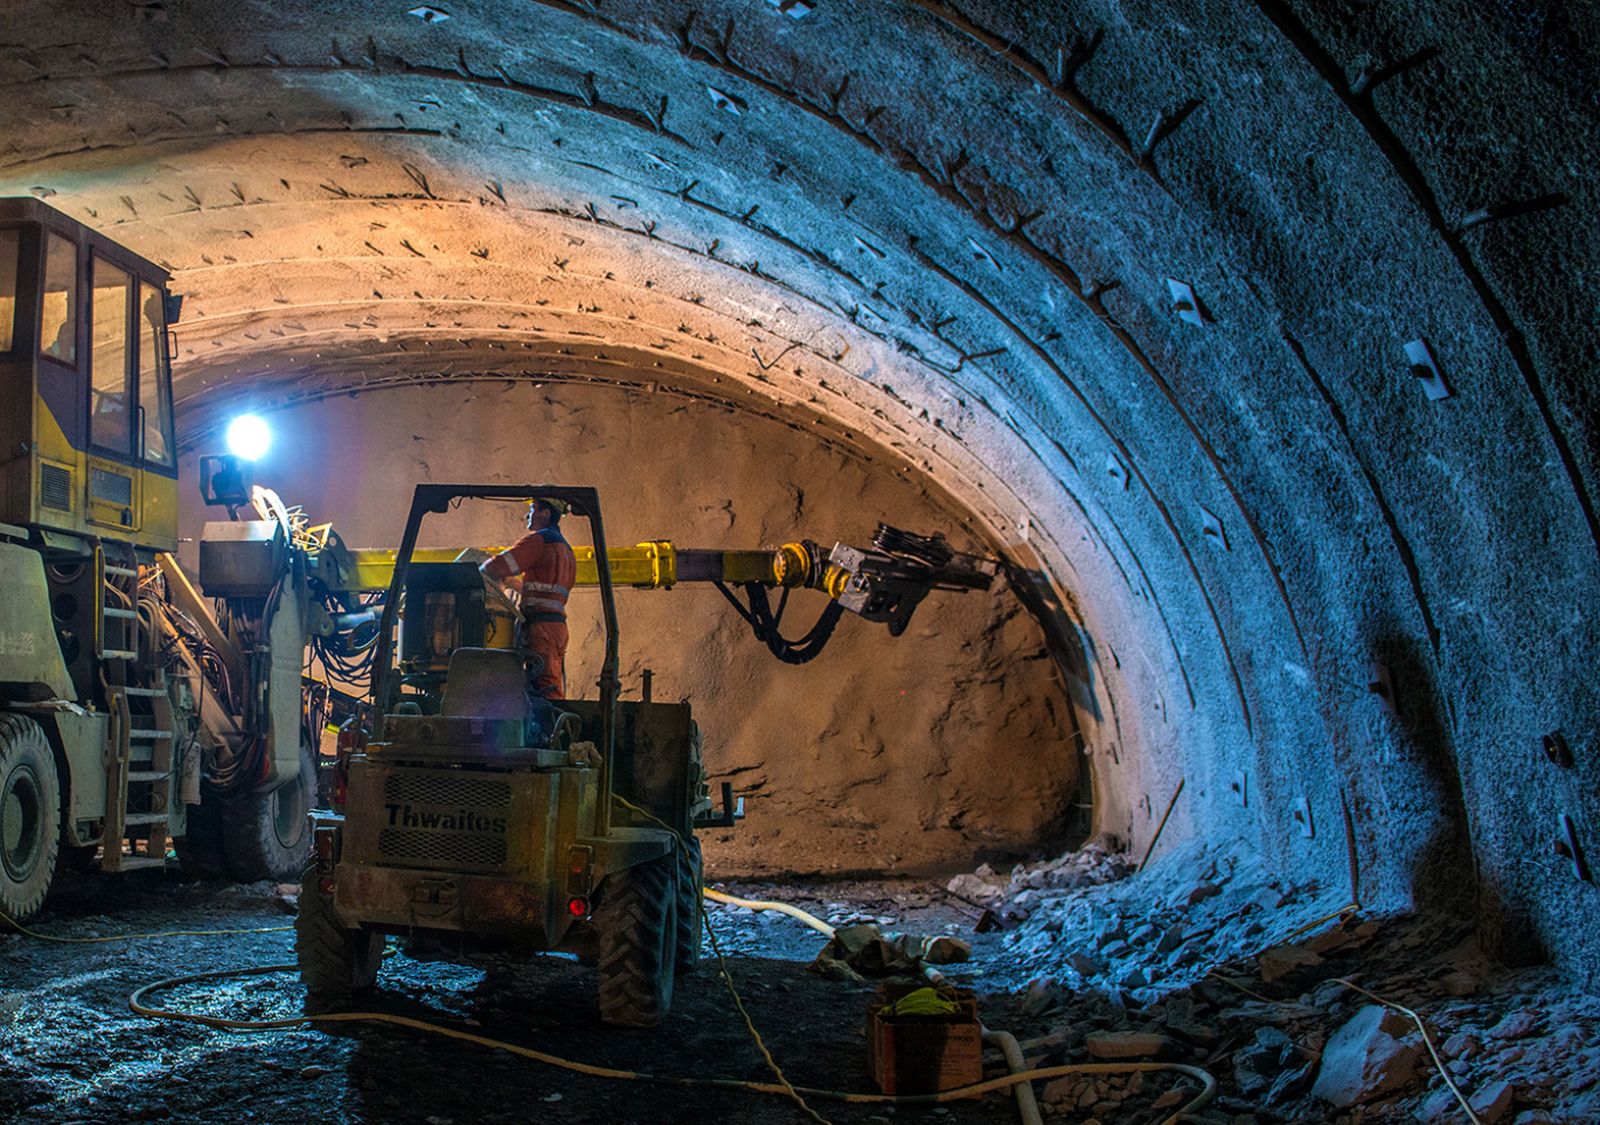 Engineers digging a tunnel with large equipment